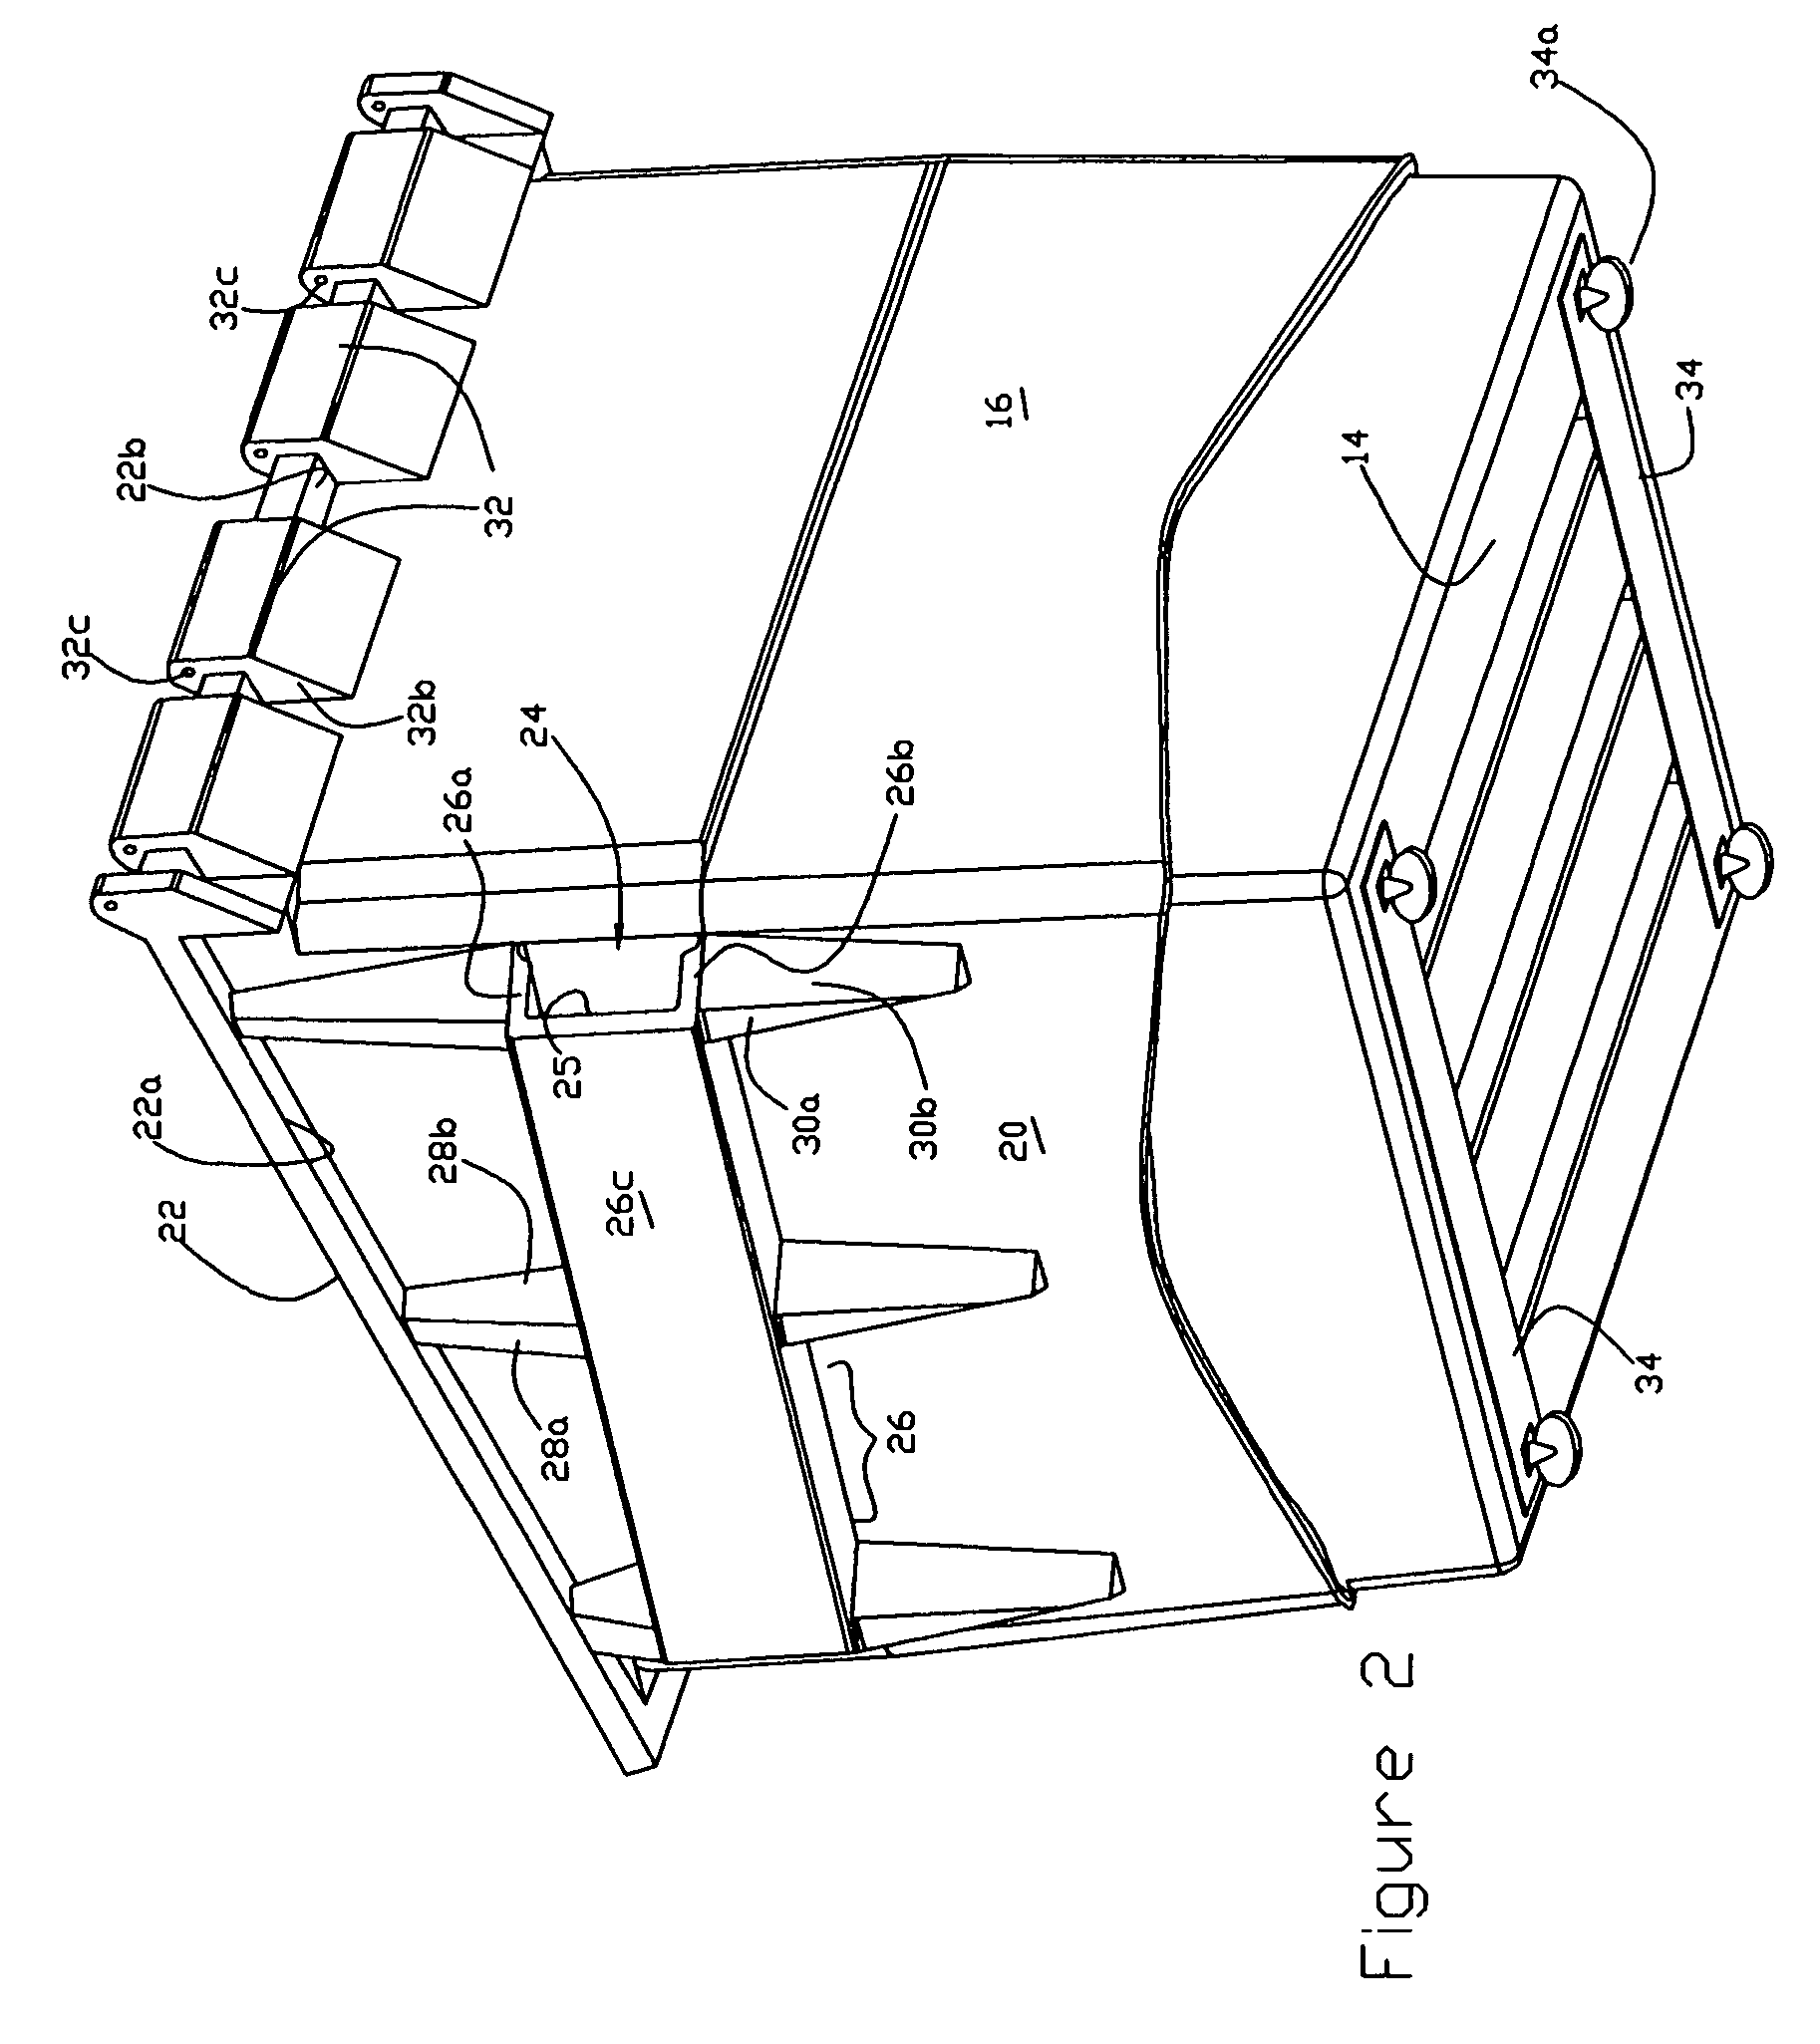 Molded plastic waste container with integral side channels for receiving lifting prongs and method